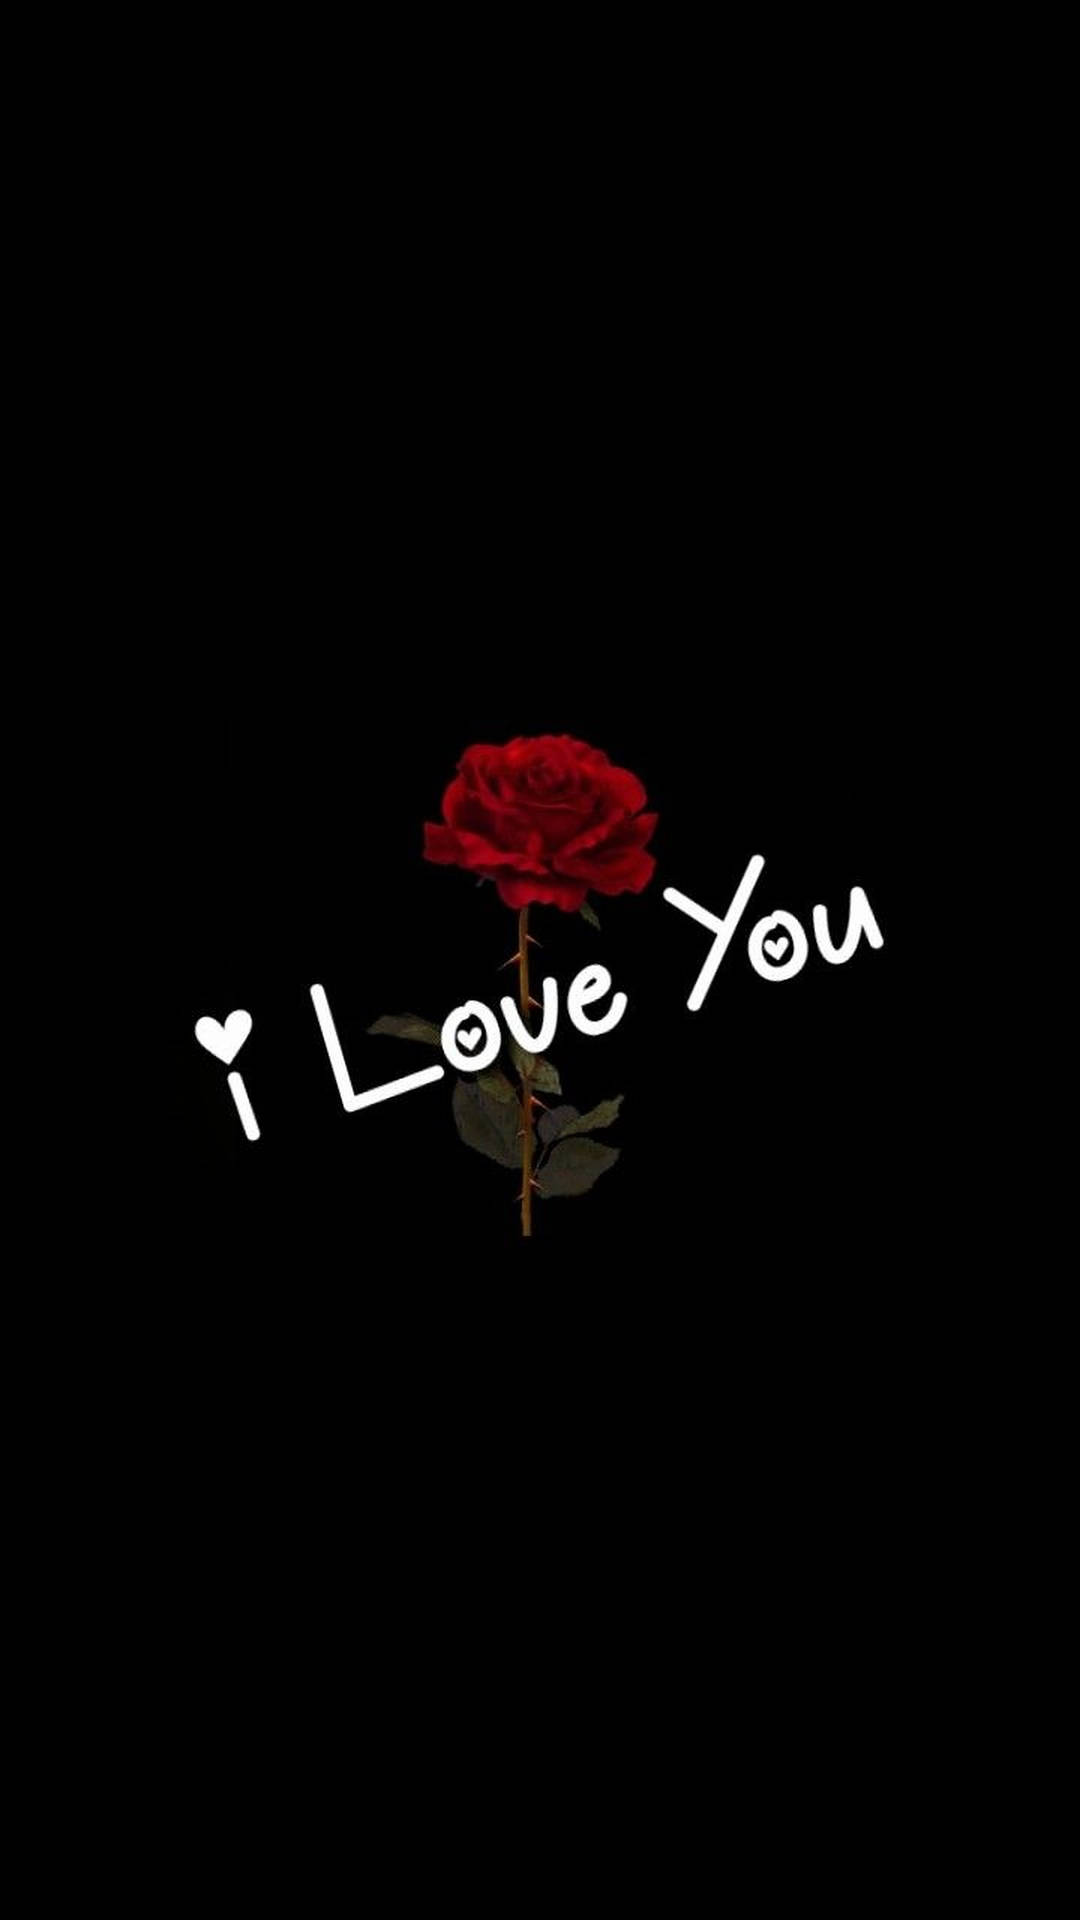 I Love You Red Rose Wallpaper